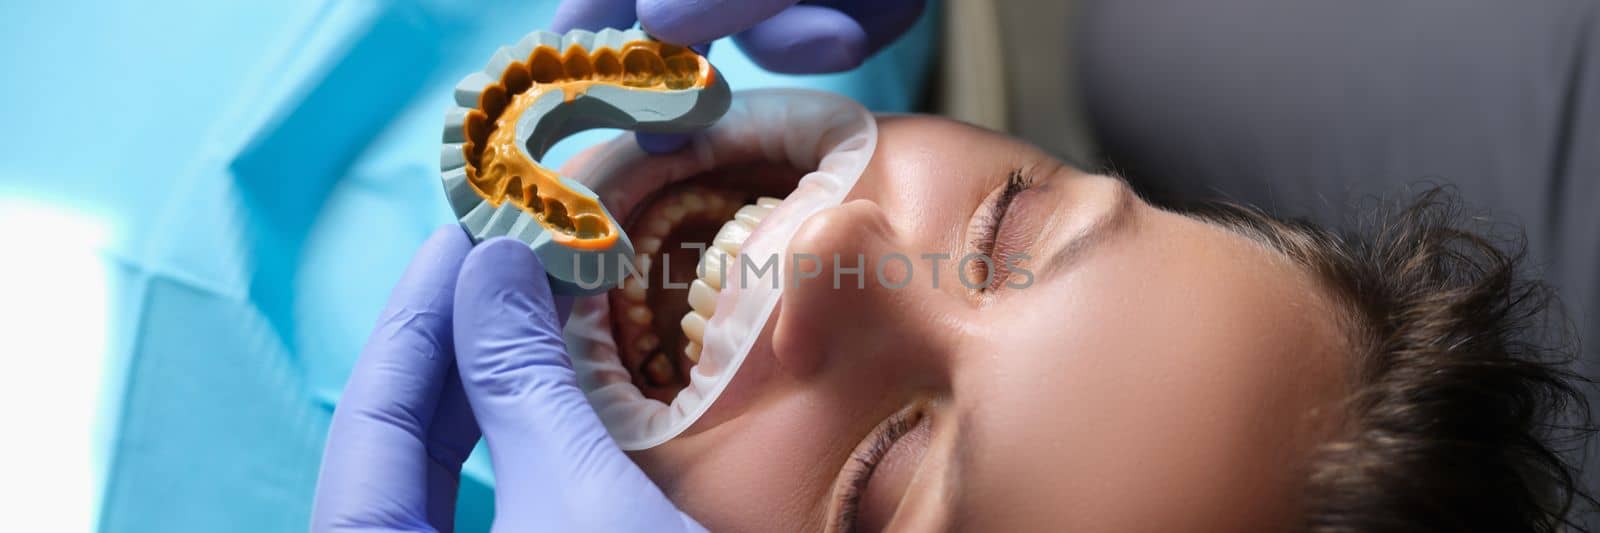 Simulation of artificial teeth on plaster model and patient with open mouth at dentist appointment. Preparing jaw for veneers concept